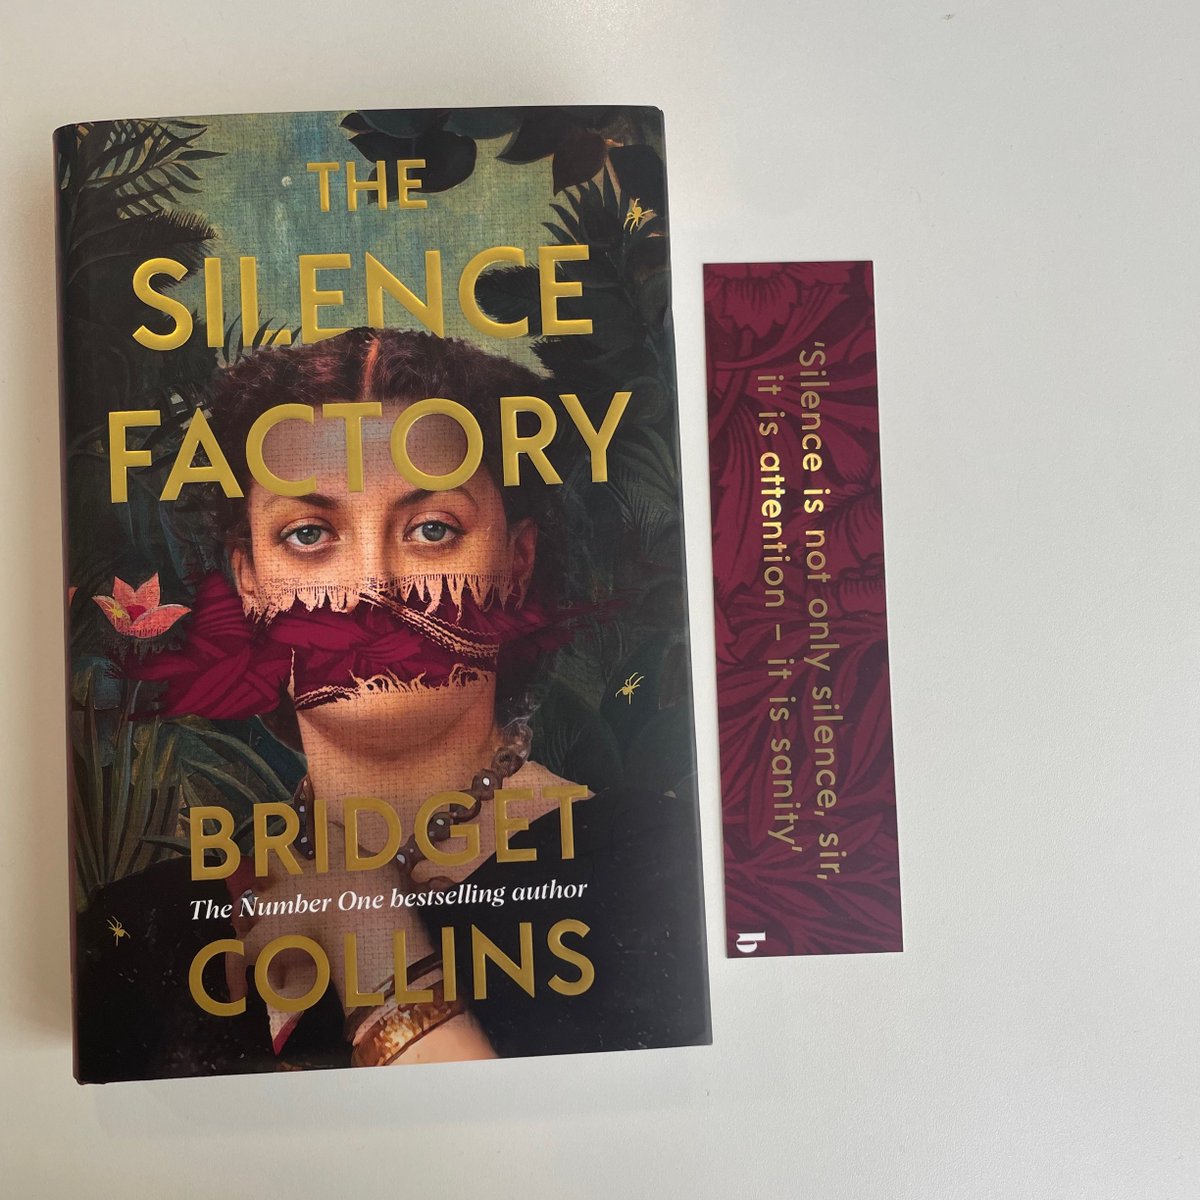 One week until @Br1dgetCollins' The Silence Factory hits bookshelves! And we've got some very exciting updates...🥳👇 First of all... these *stunning* gold foil bookmarks arrived. These are EXCLUSIVE to indie bookshops, so if you want one order here: harpercollins.co.uk/pages/the-sile…